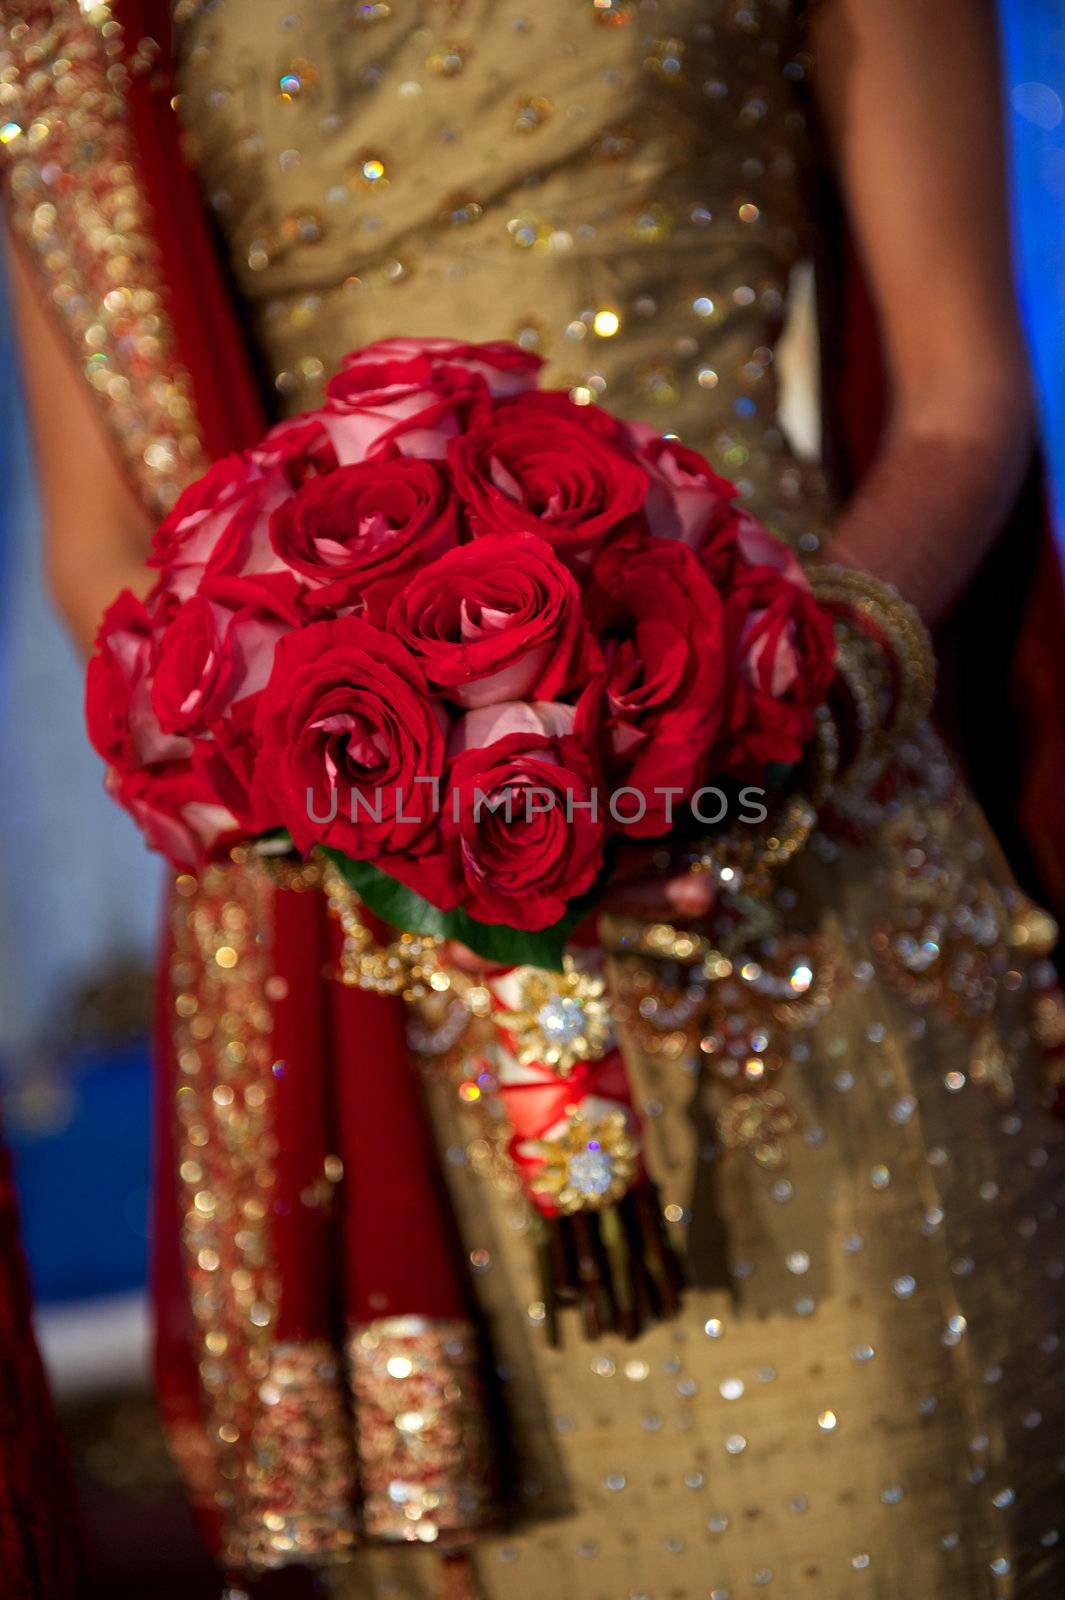 Image of a beautiful Indian bride's bouquet during wedding